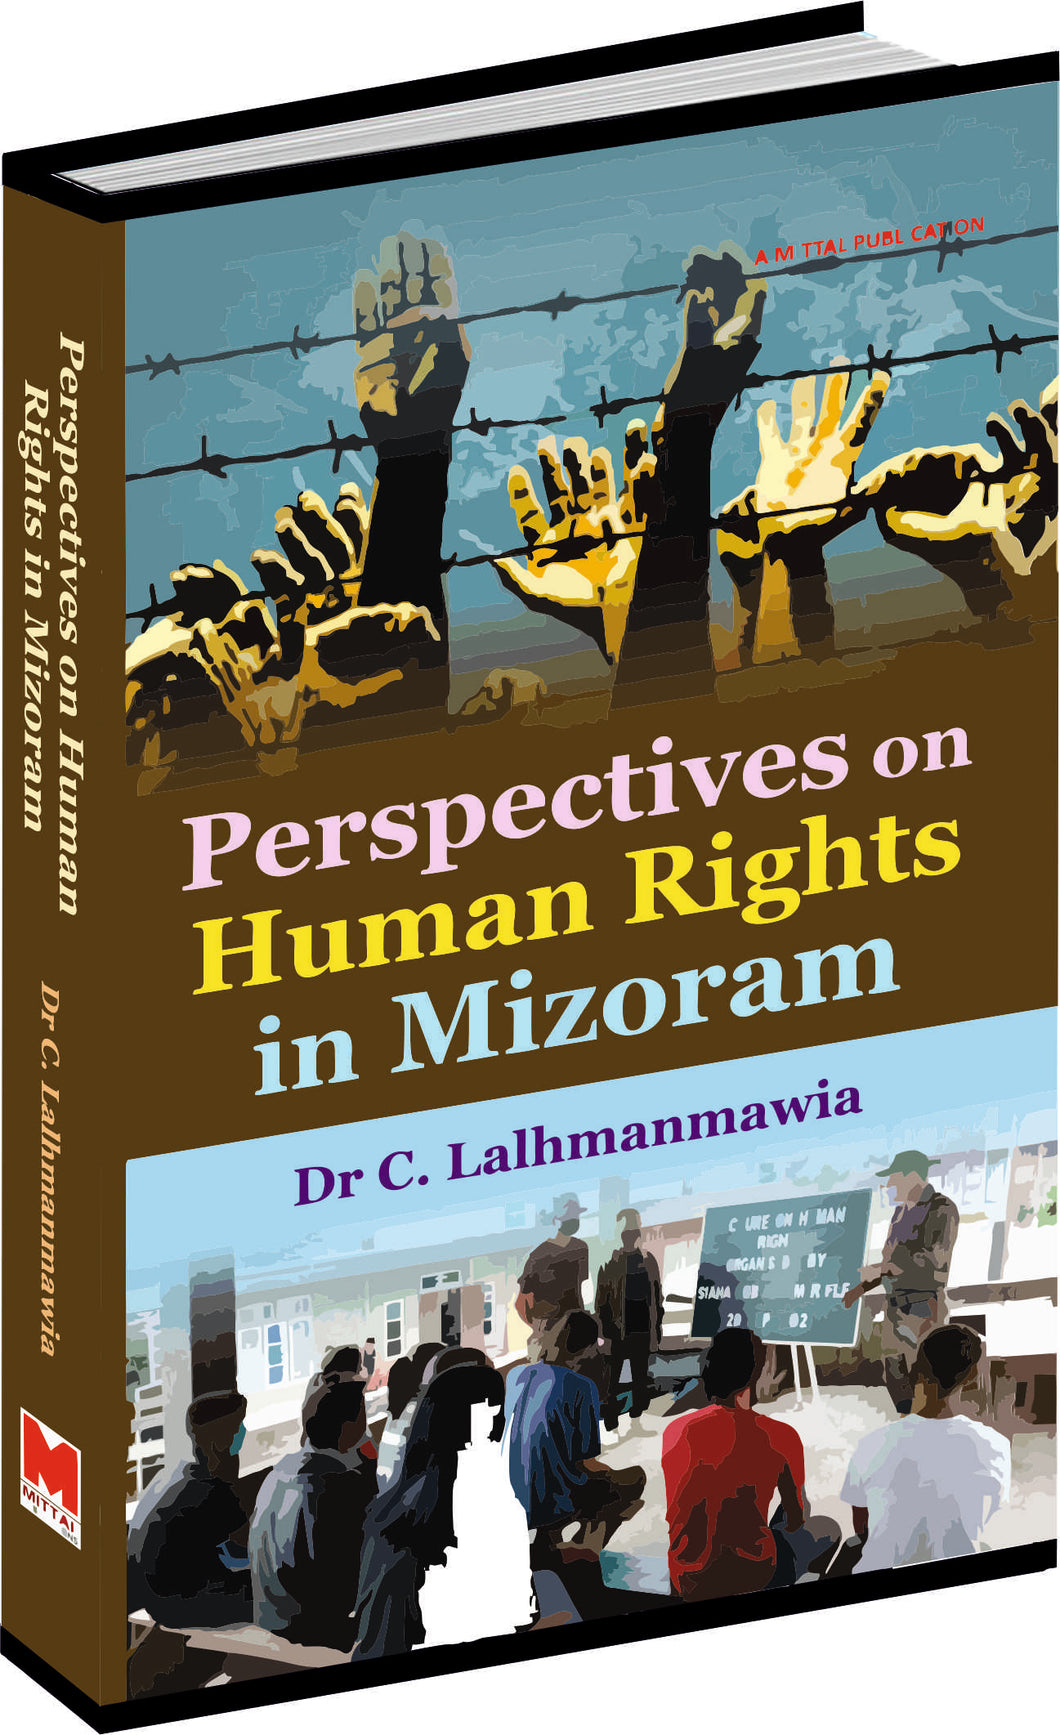 Perspectives on Human Rights in Mizoram by Dr C. Lalhmanmawia